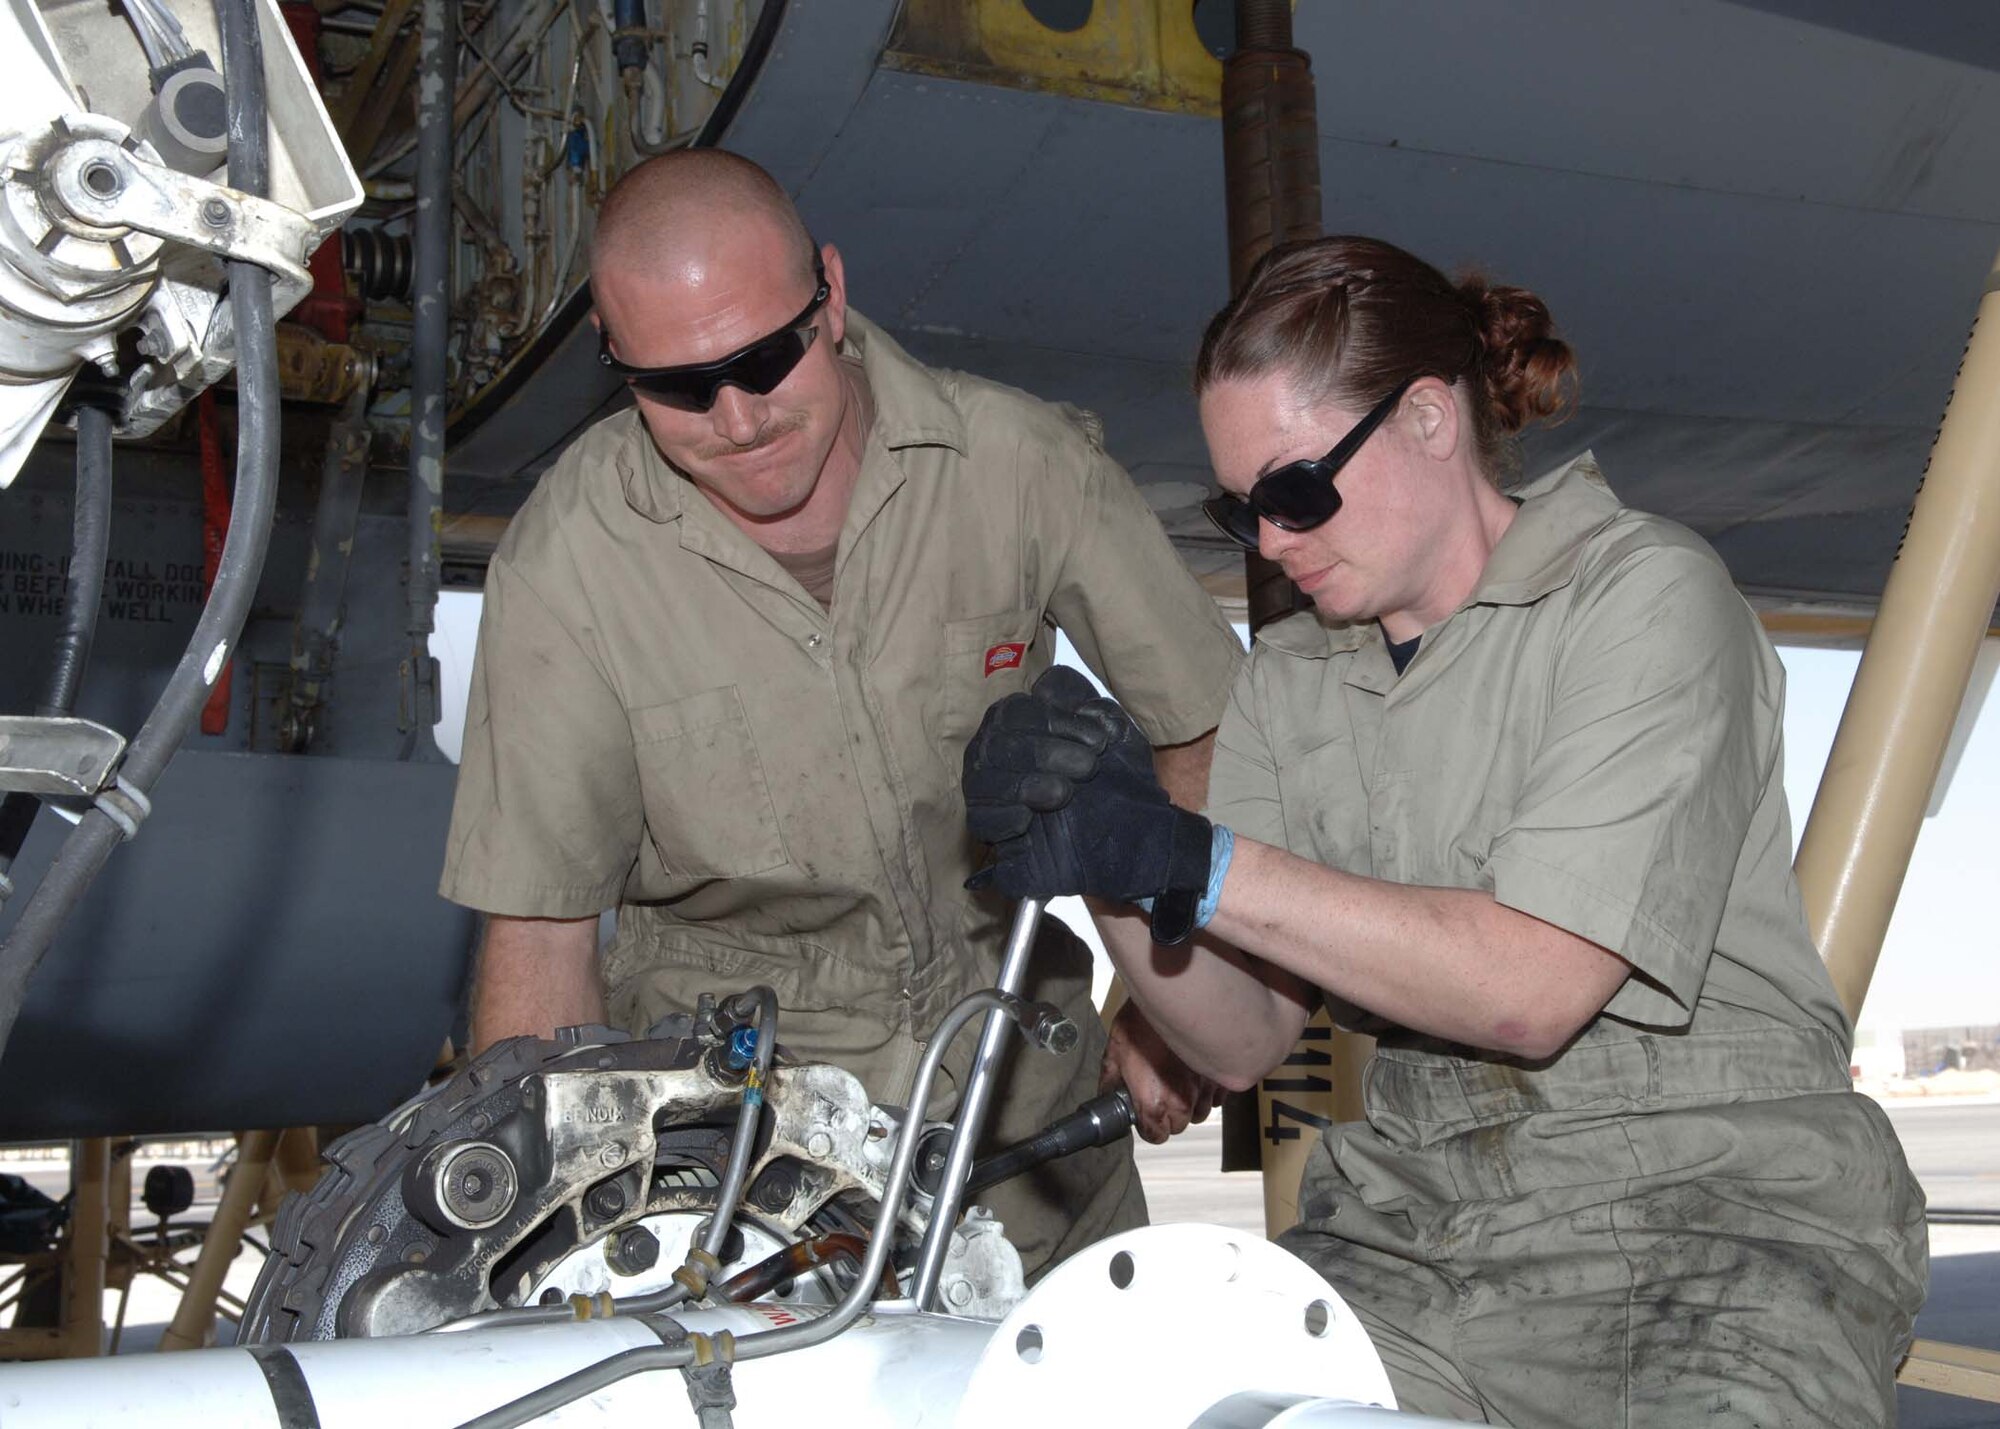 Tech. Sgt. Paul Woodward, left, 22nd Maintenance Squadron, and Senior Airman Rebekah Metcalfe, 22nd Aircraft Maintenance Squadron, change a KC-135 main landing gear truck assembly March 1 at a deployed location. Both are McConnell members who are currently deployed to the 38th Expeditionary Aircraft Maintenance Squadron. (Air Force photo by Staff Sgt. Kyle Smith)